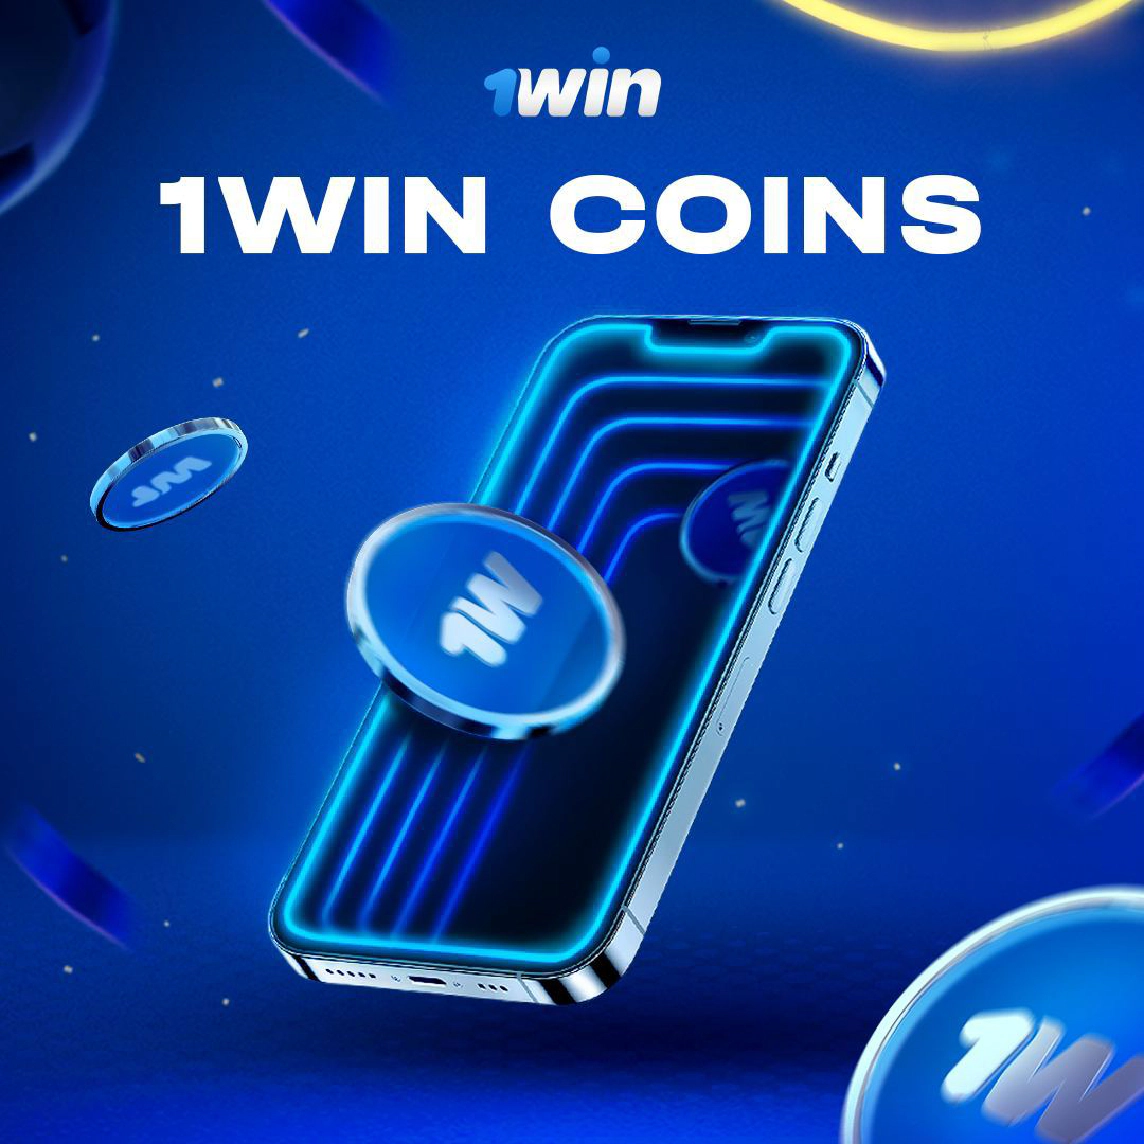 1win coins how to get